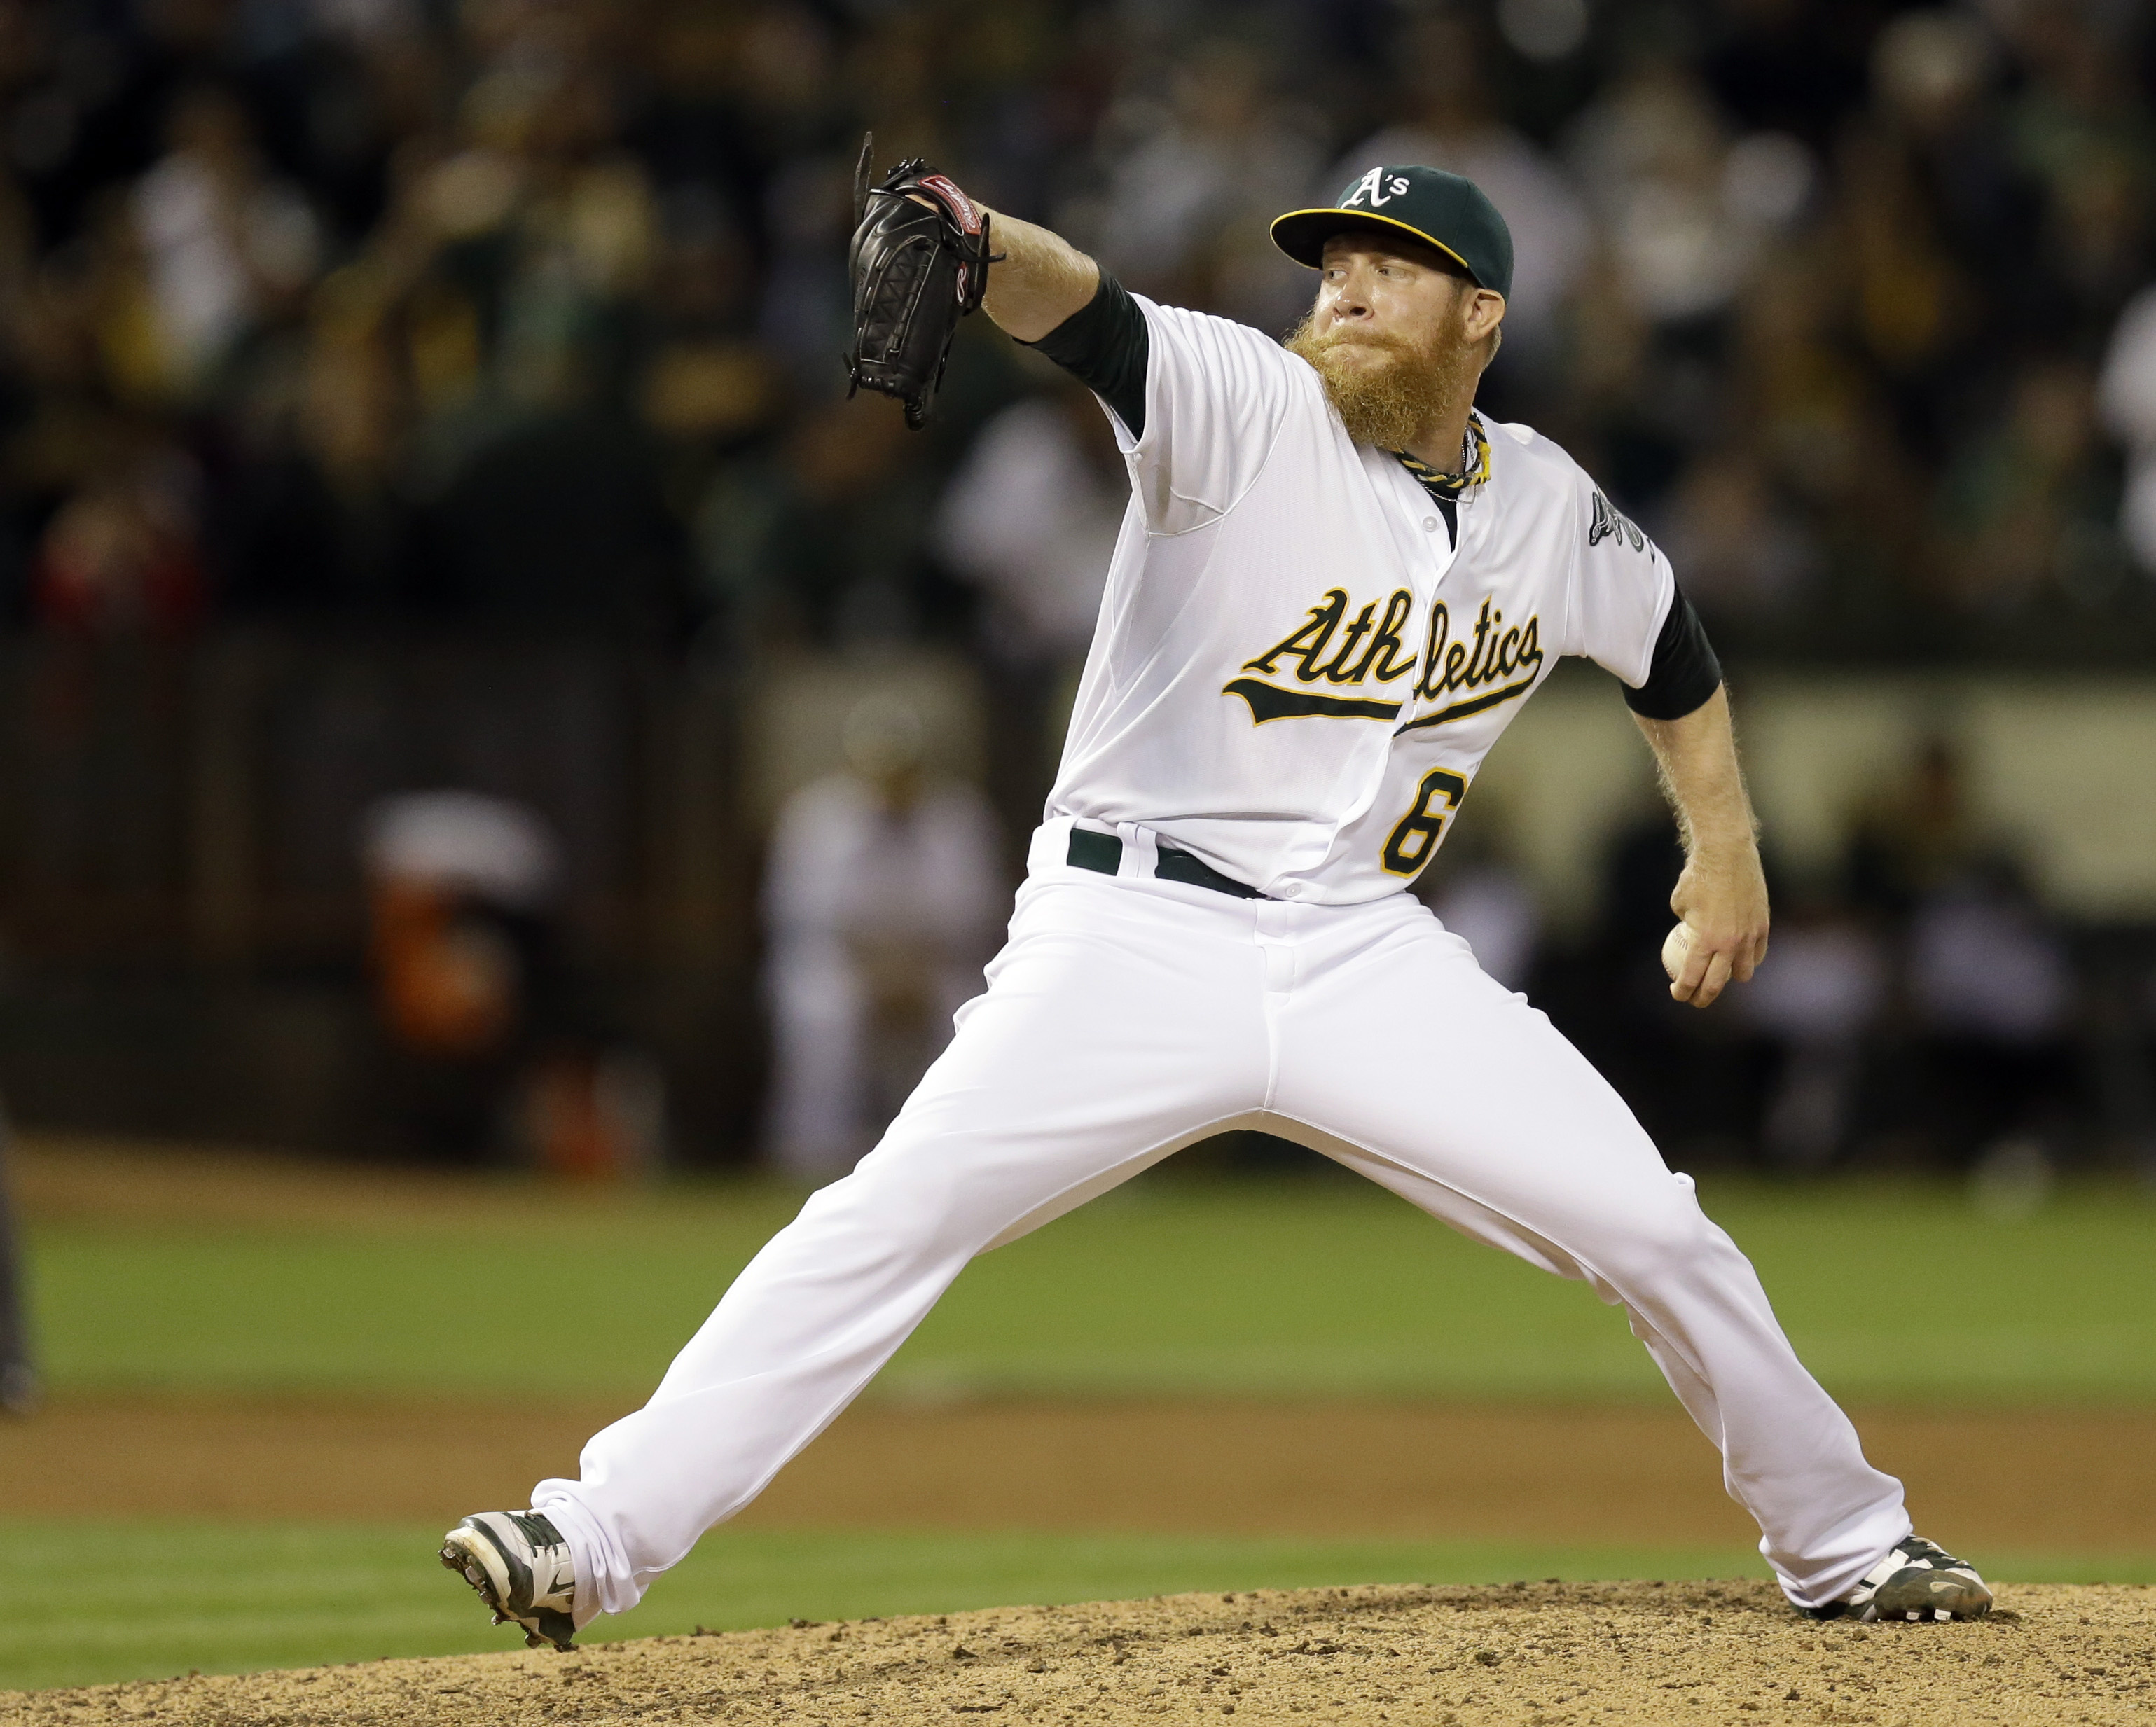 Oakland Athletics' Sean Doolittle during a game against the Tampa Bay Rays in Oakland, Calif. on Aug. 5, 2014. (Ben Margot—AP)